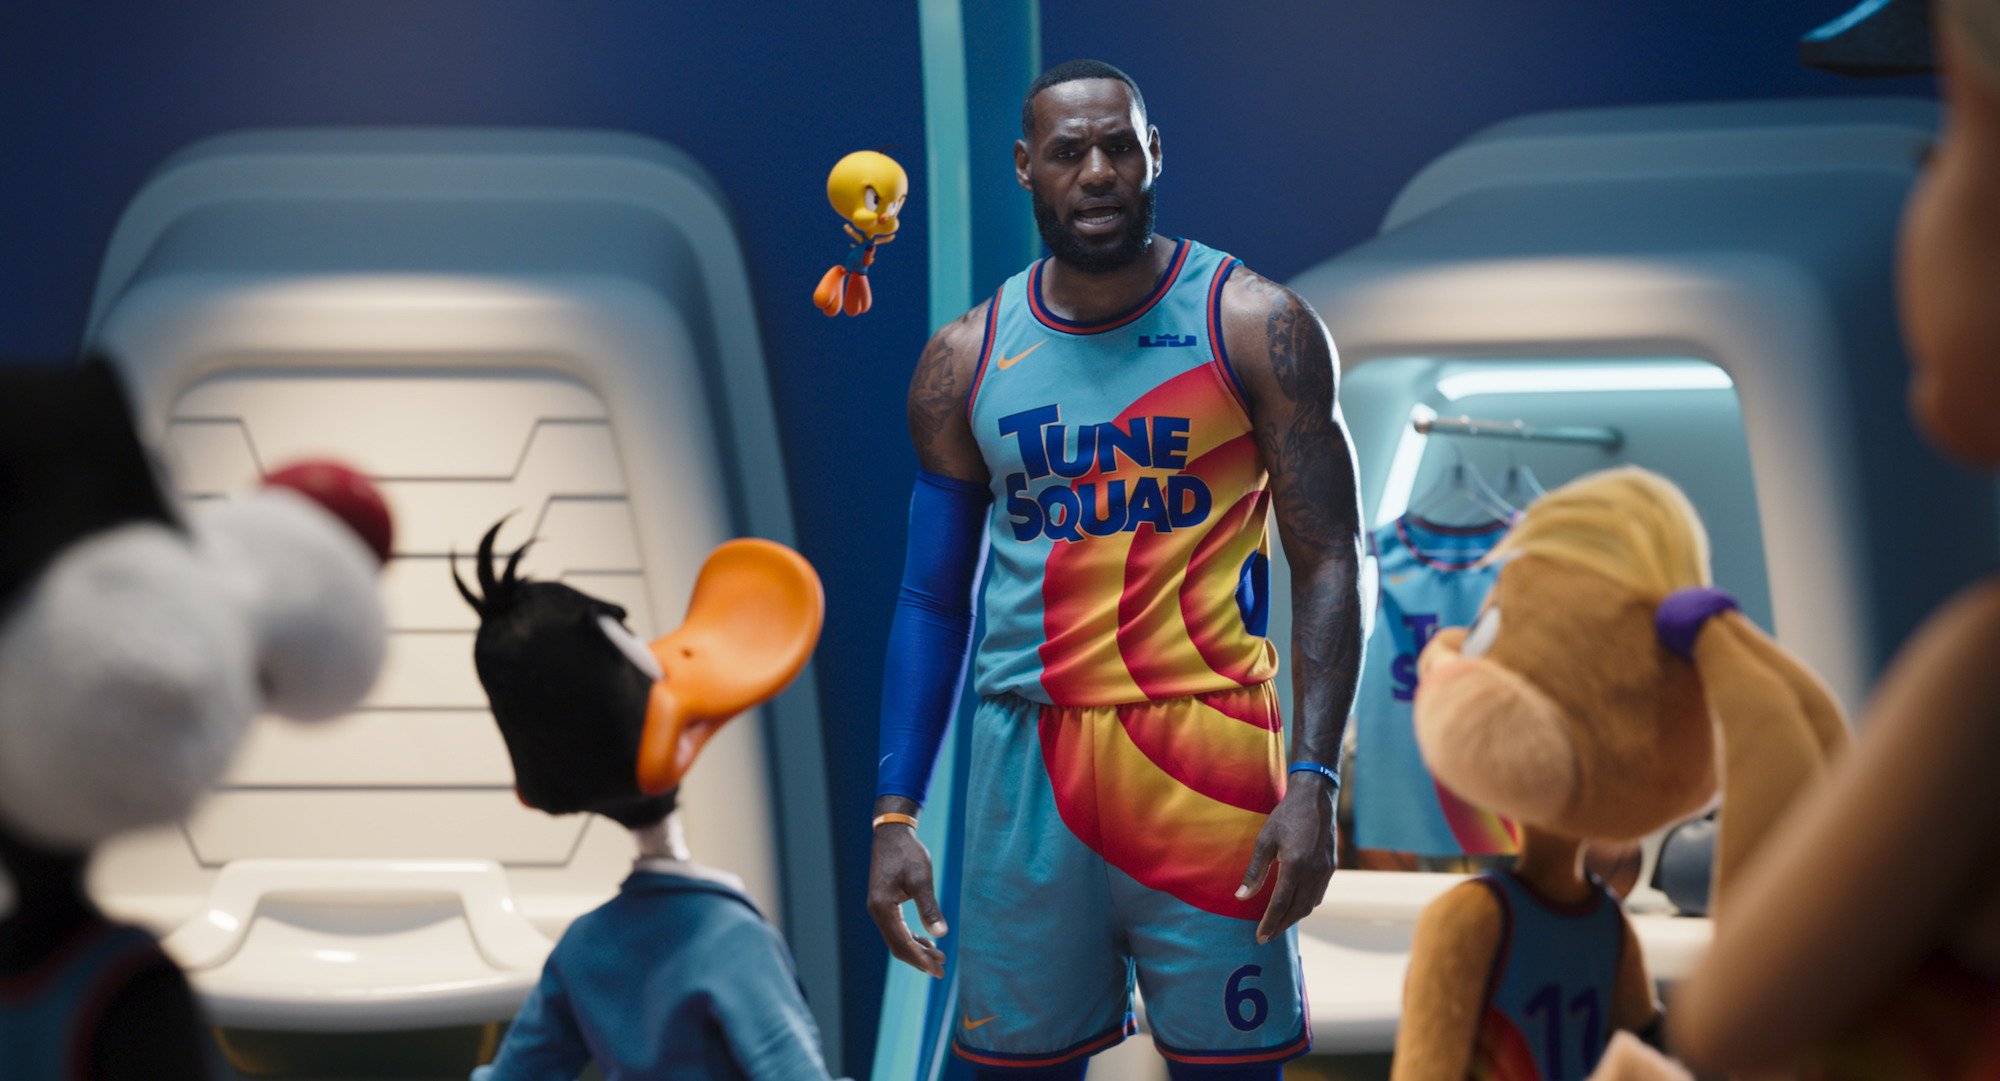 Microsoft teams up with Warner Bros., LeBron James and Bugs Bunny to  empower a new generation of developers - The Official Microsoft Blog